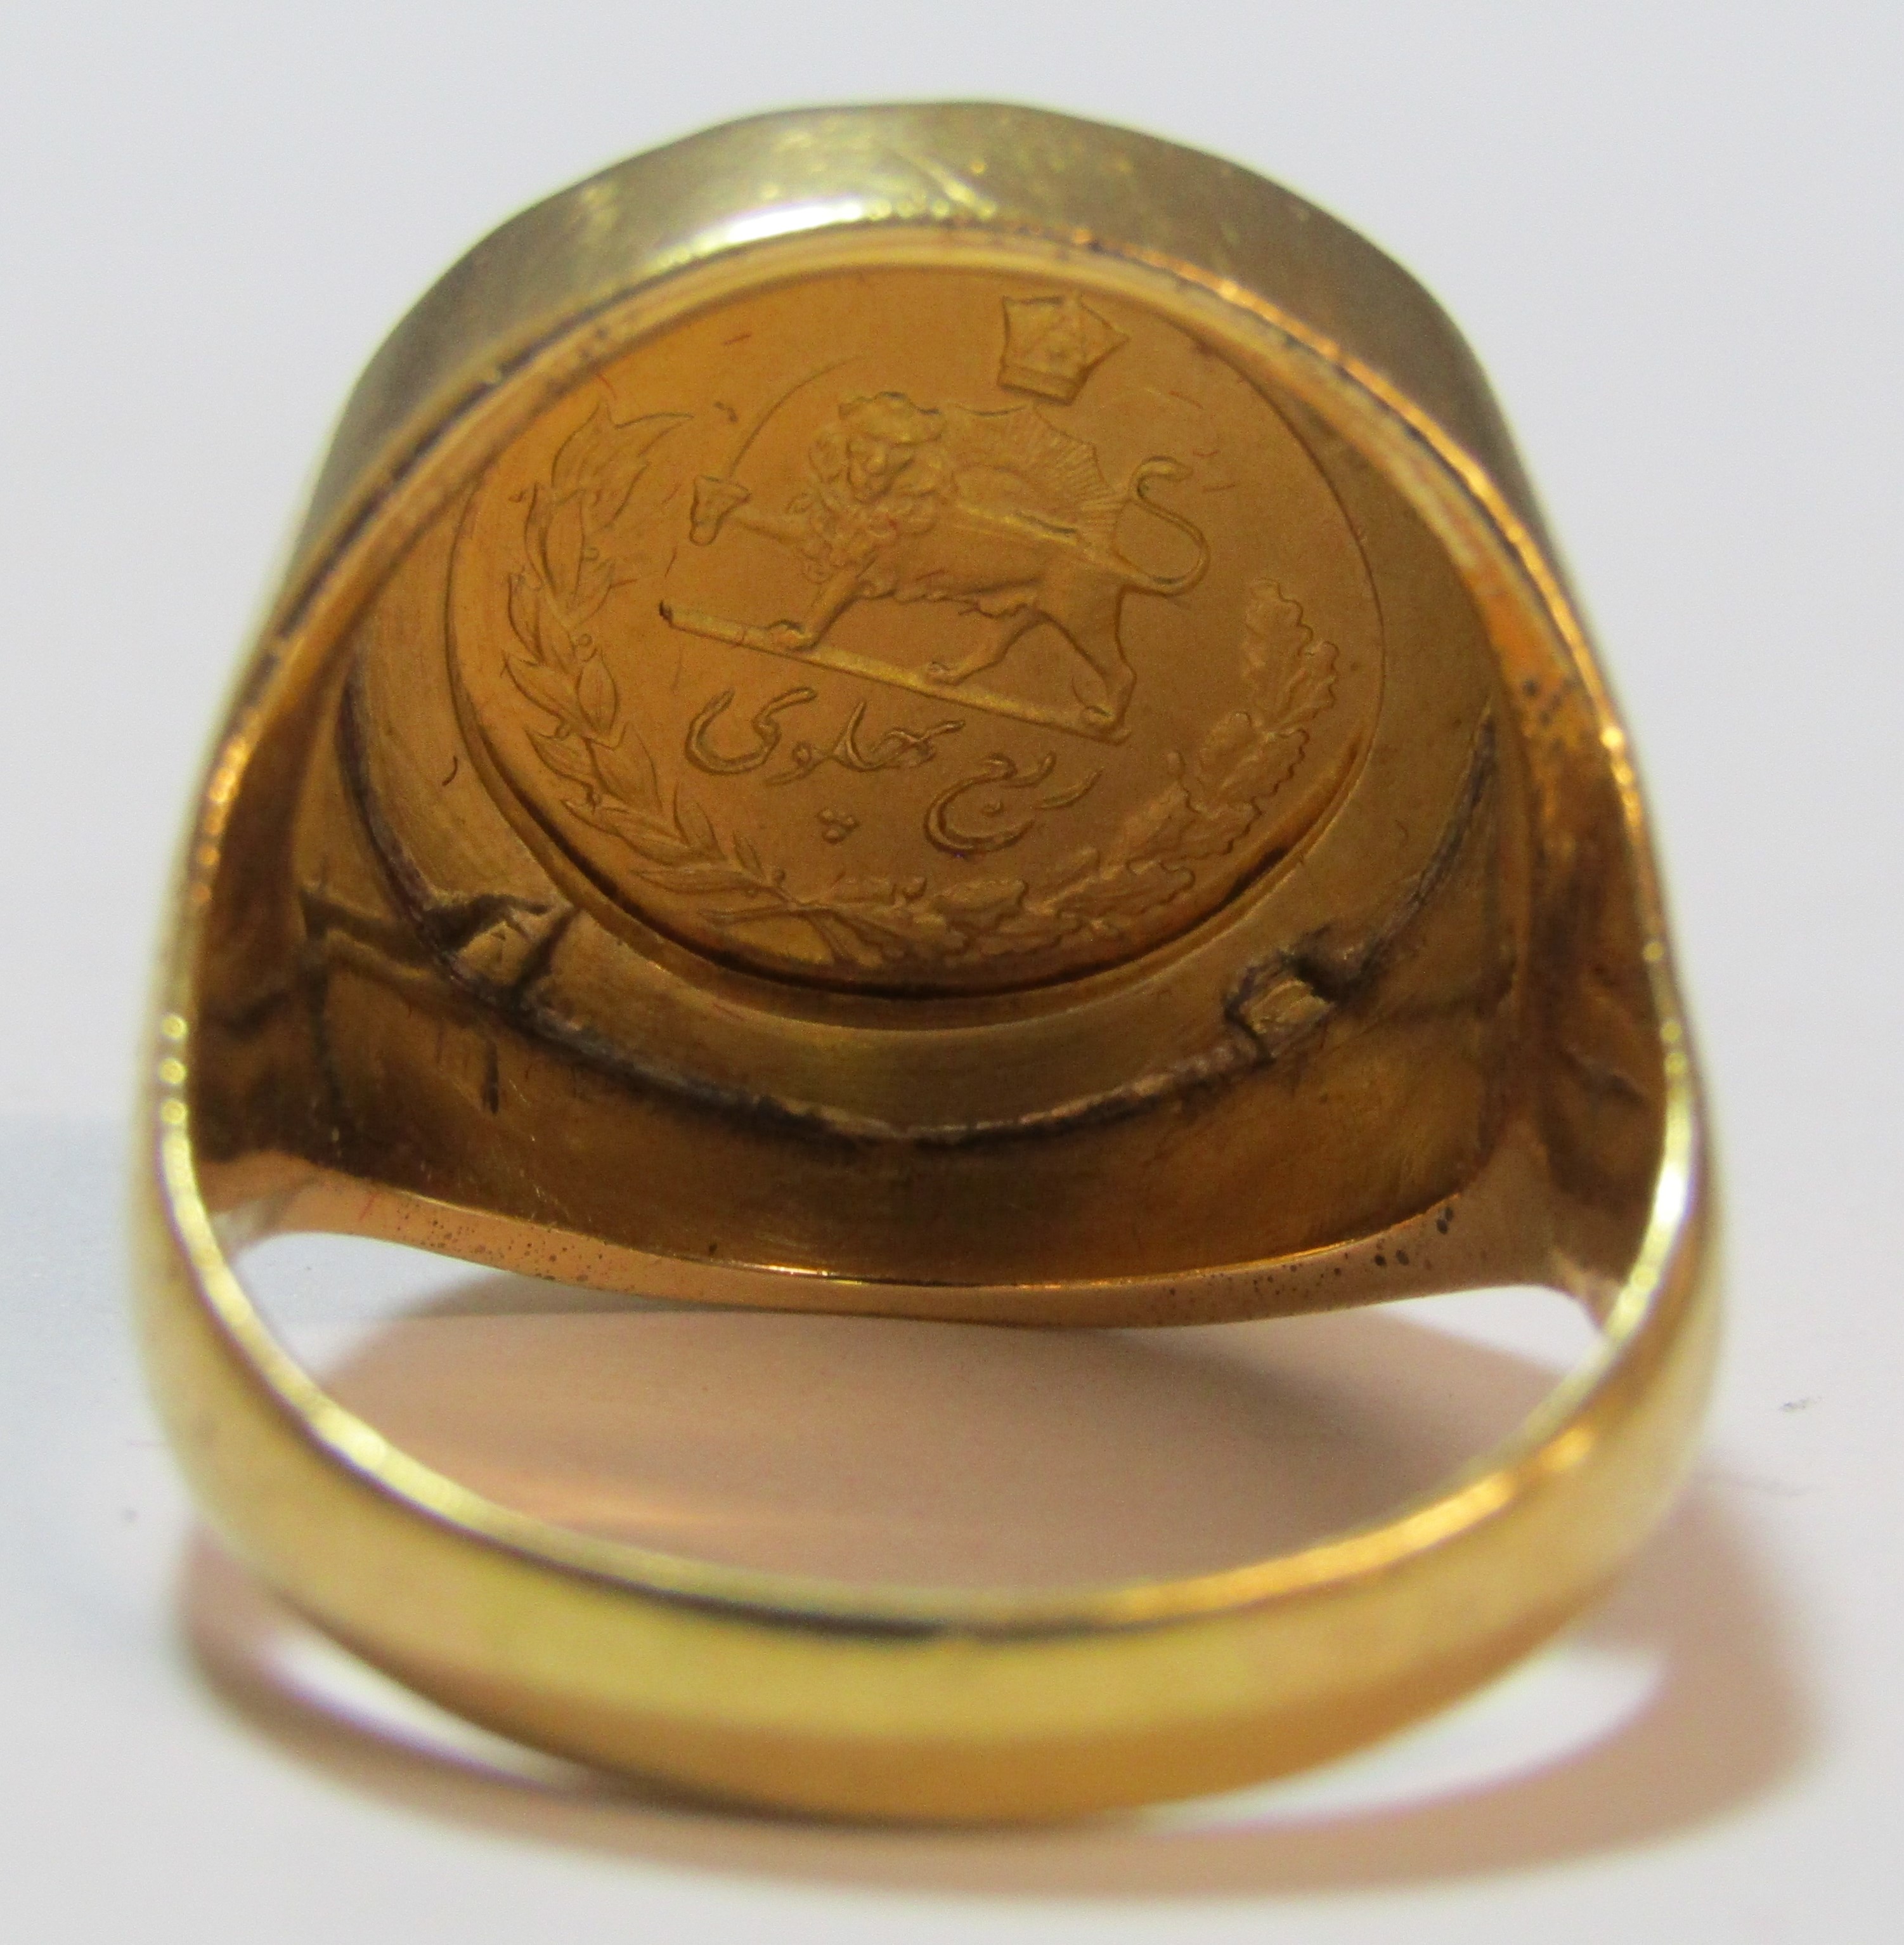 Tested as 9ct gold ring mounted with 22ct Phalavi Mohammad Reza Shah Iran gold quarter - ring size N - Image 6 of 6